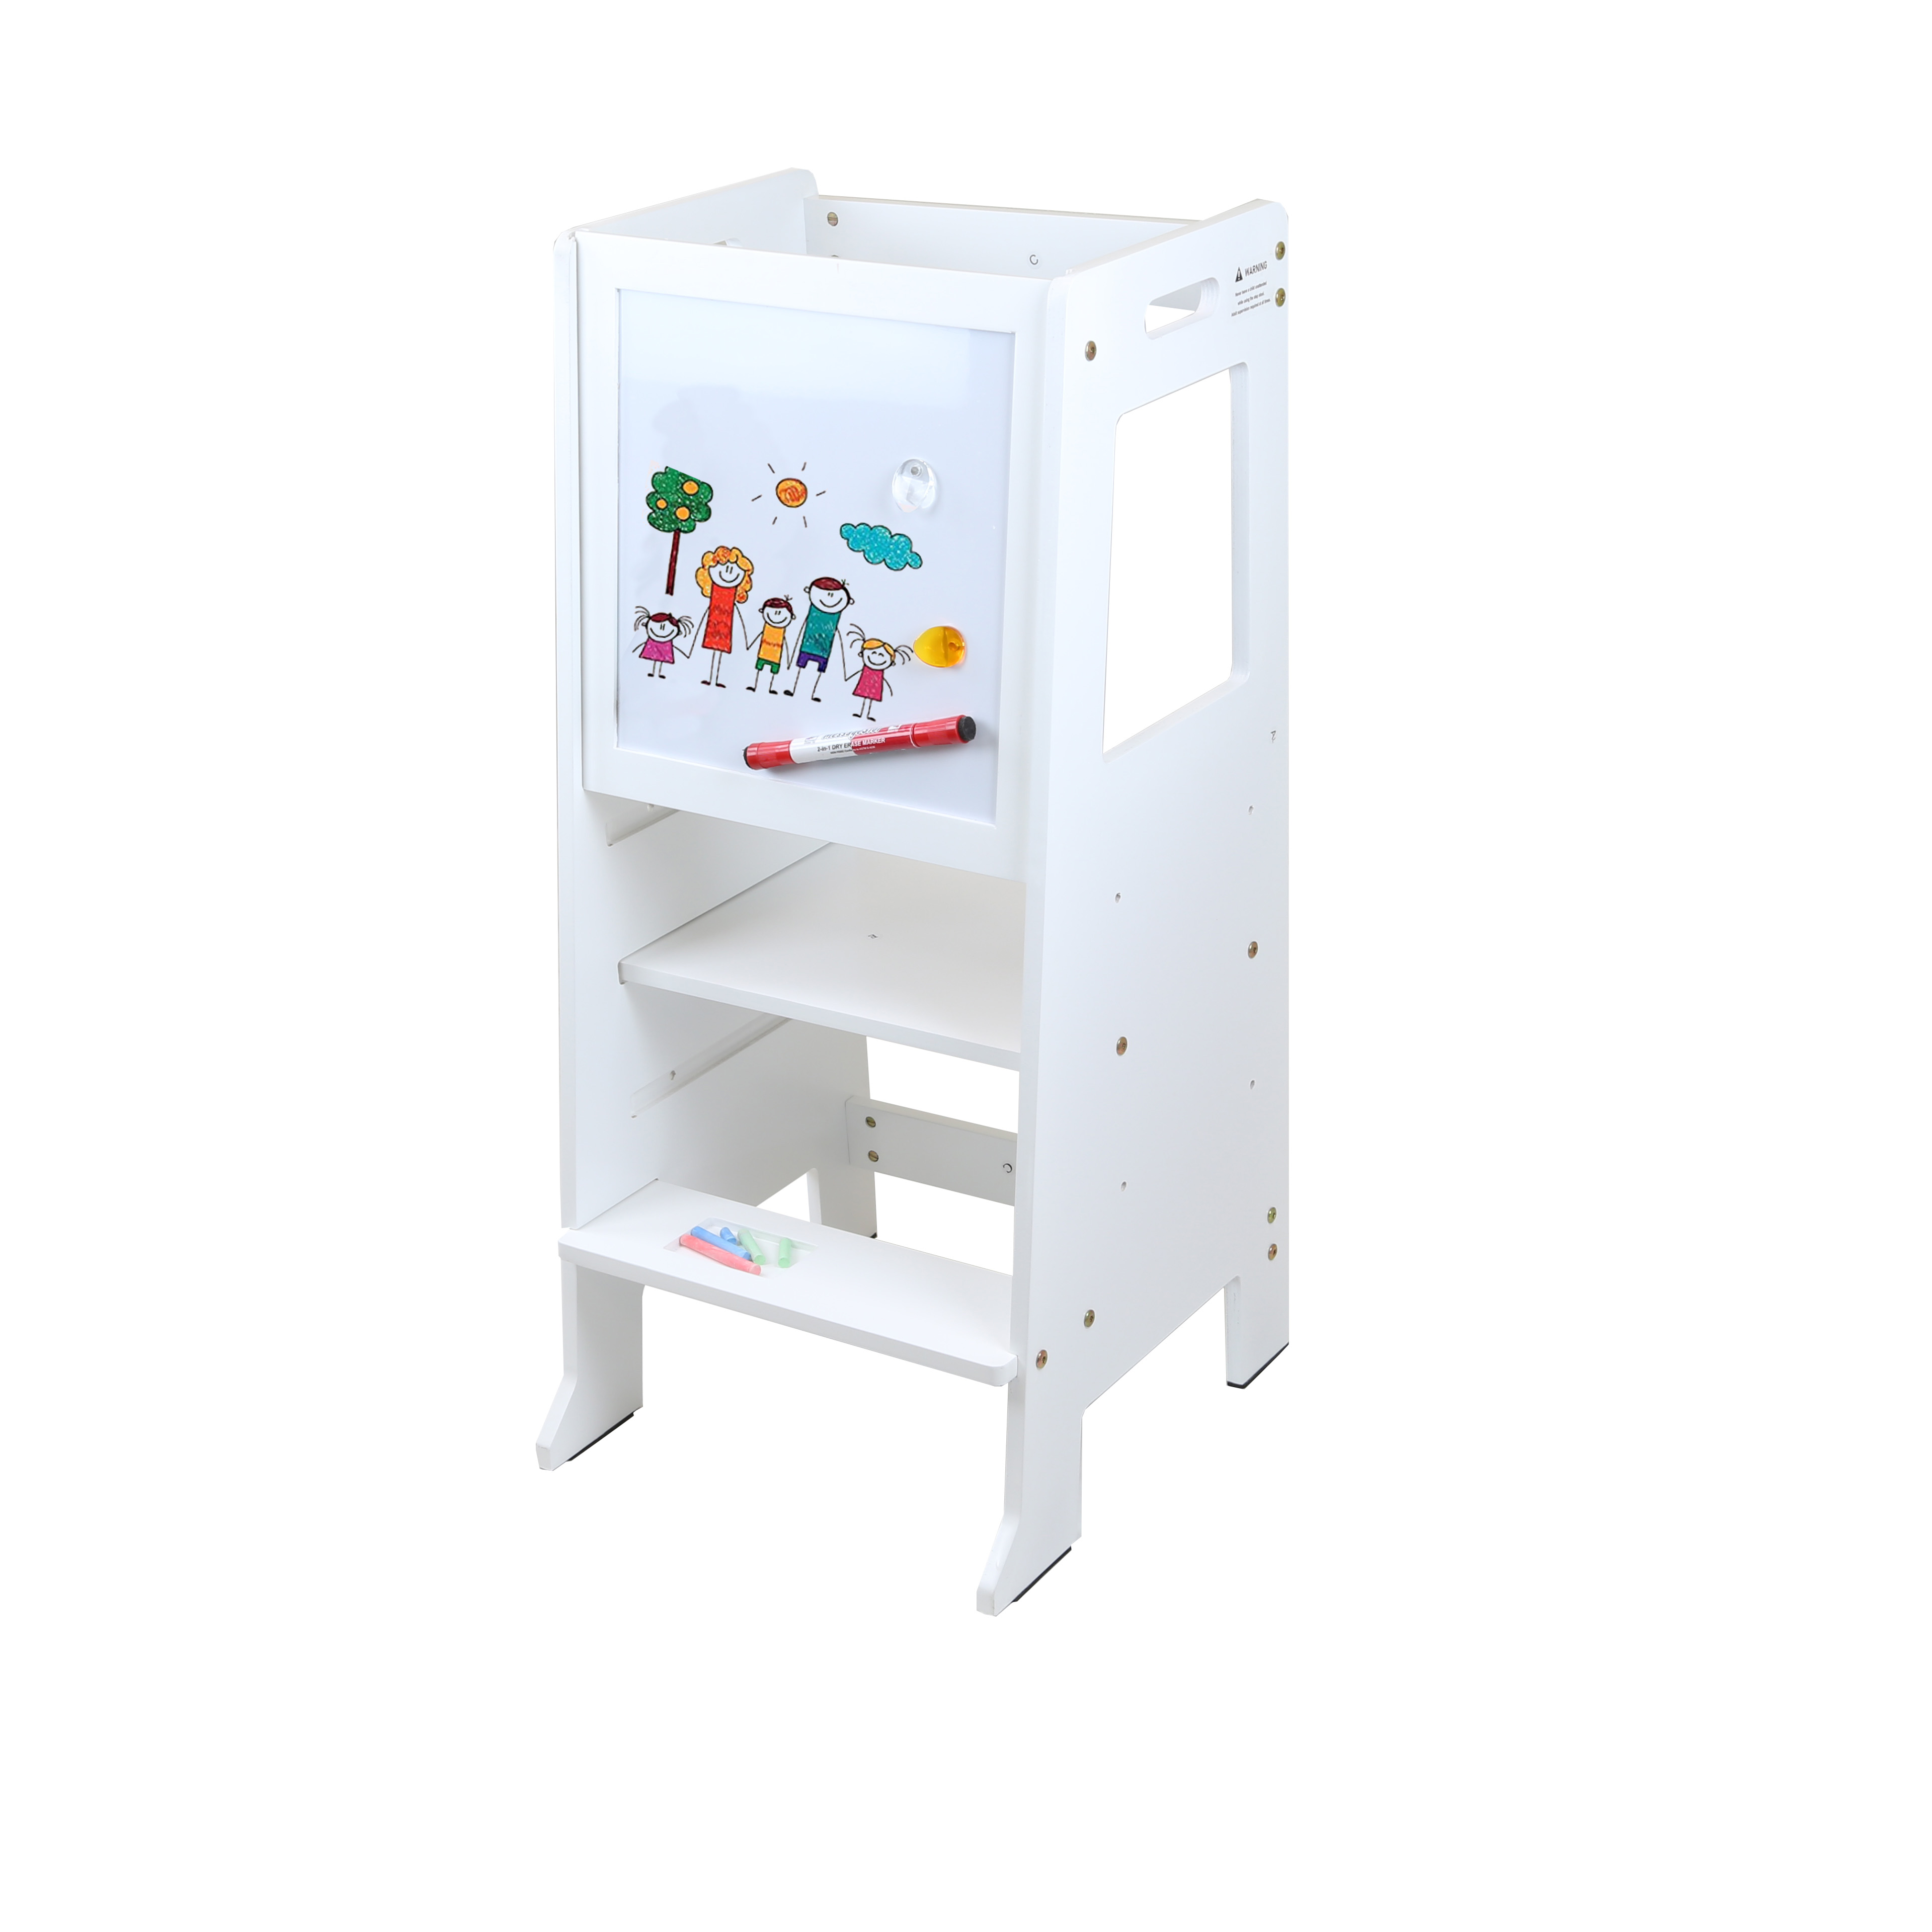 Clevr Height Adjustable Kids Kitchen Step Stool with Magnetic Activity Board (White)